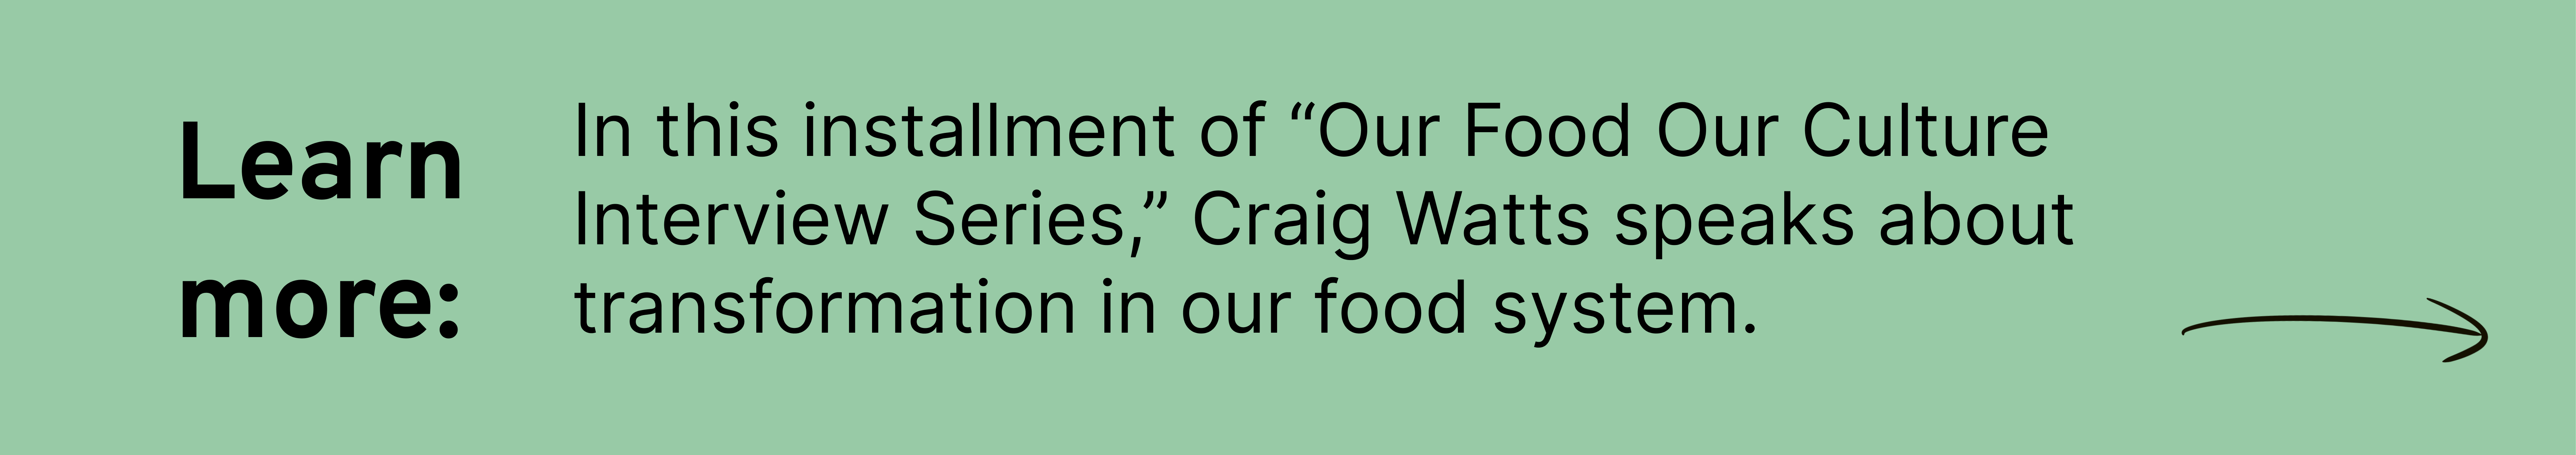 learn more: In this installment of “Our Food Our Culture Interview Series,” Craig Watts speaks about transformation in our food system. 